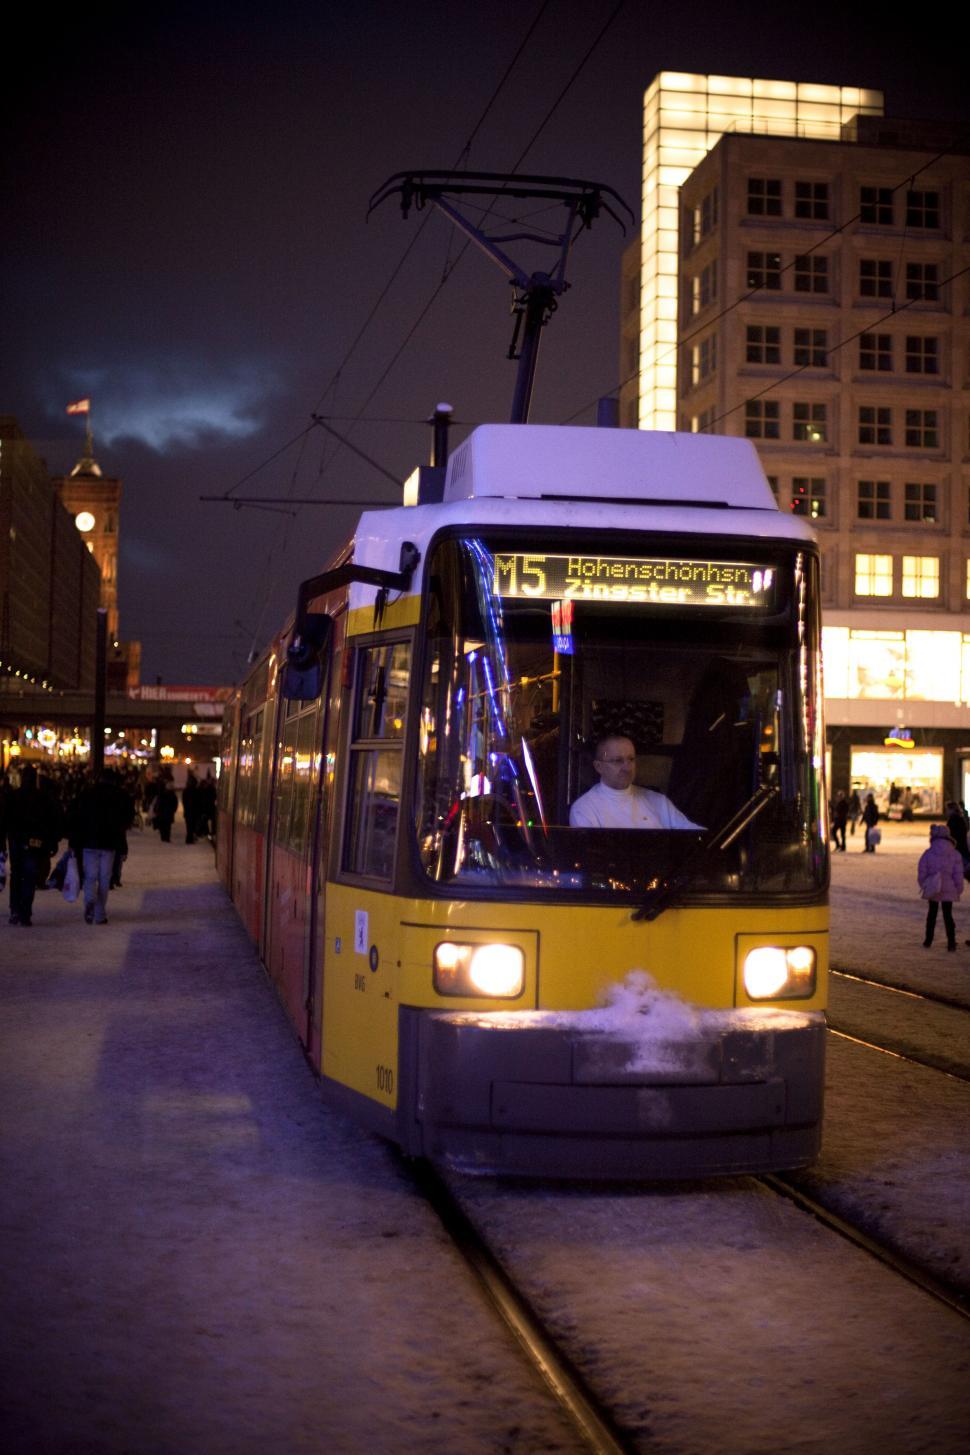 Free Image of A yellow and white train on a snowy street, Berlin, Germany 